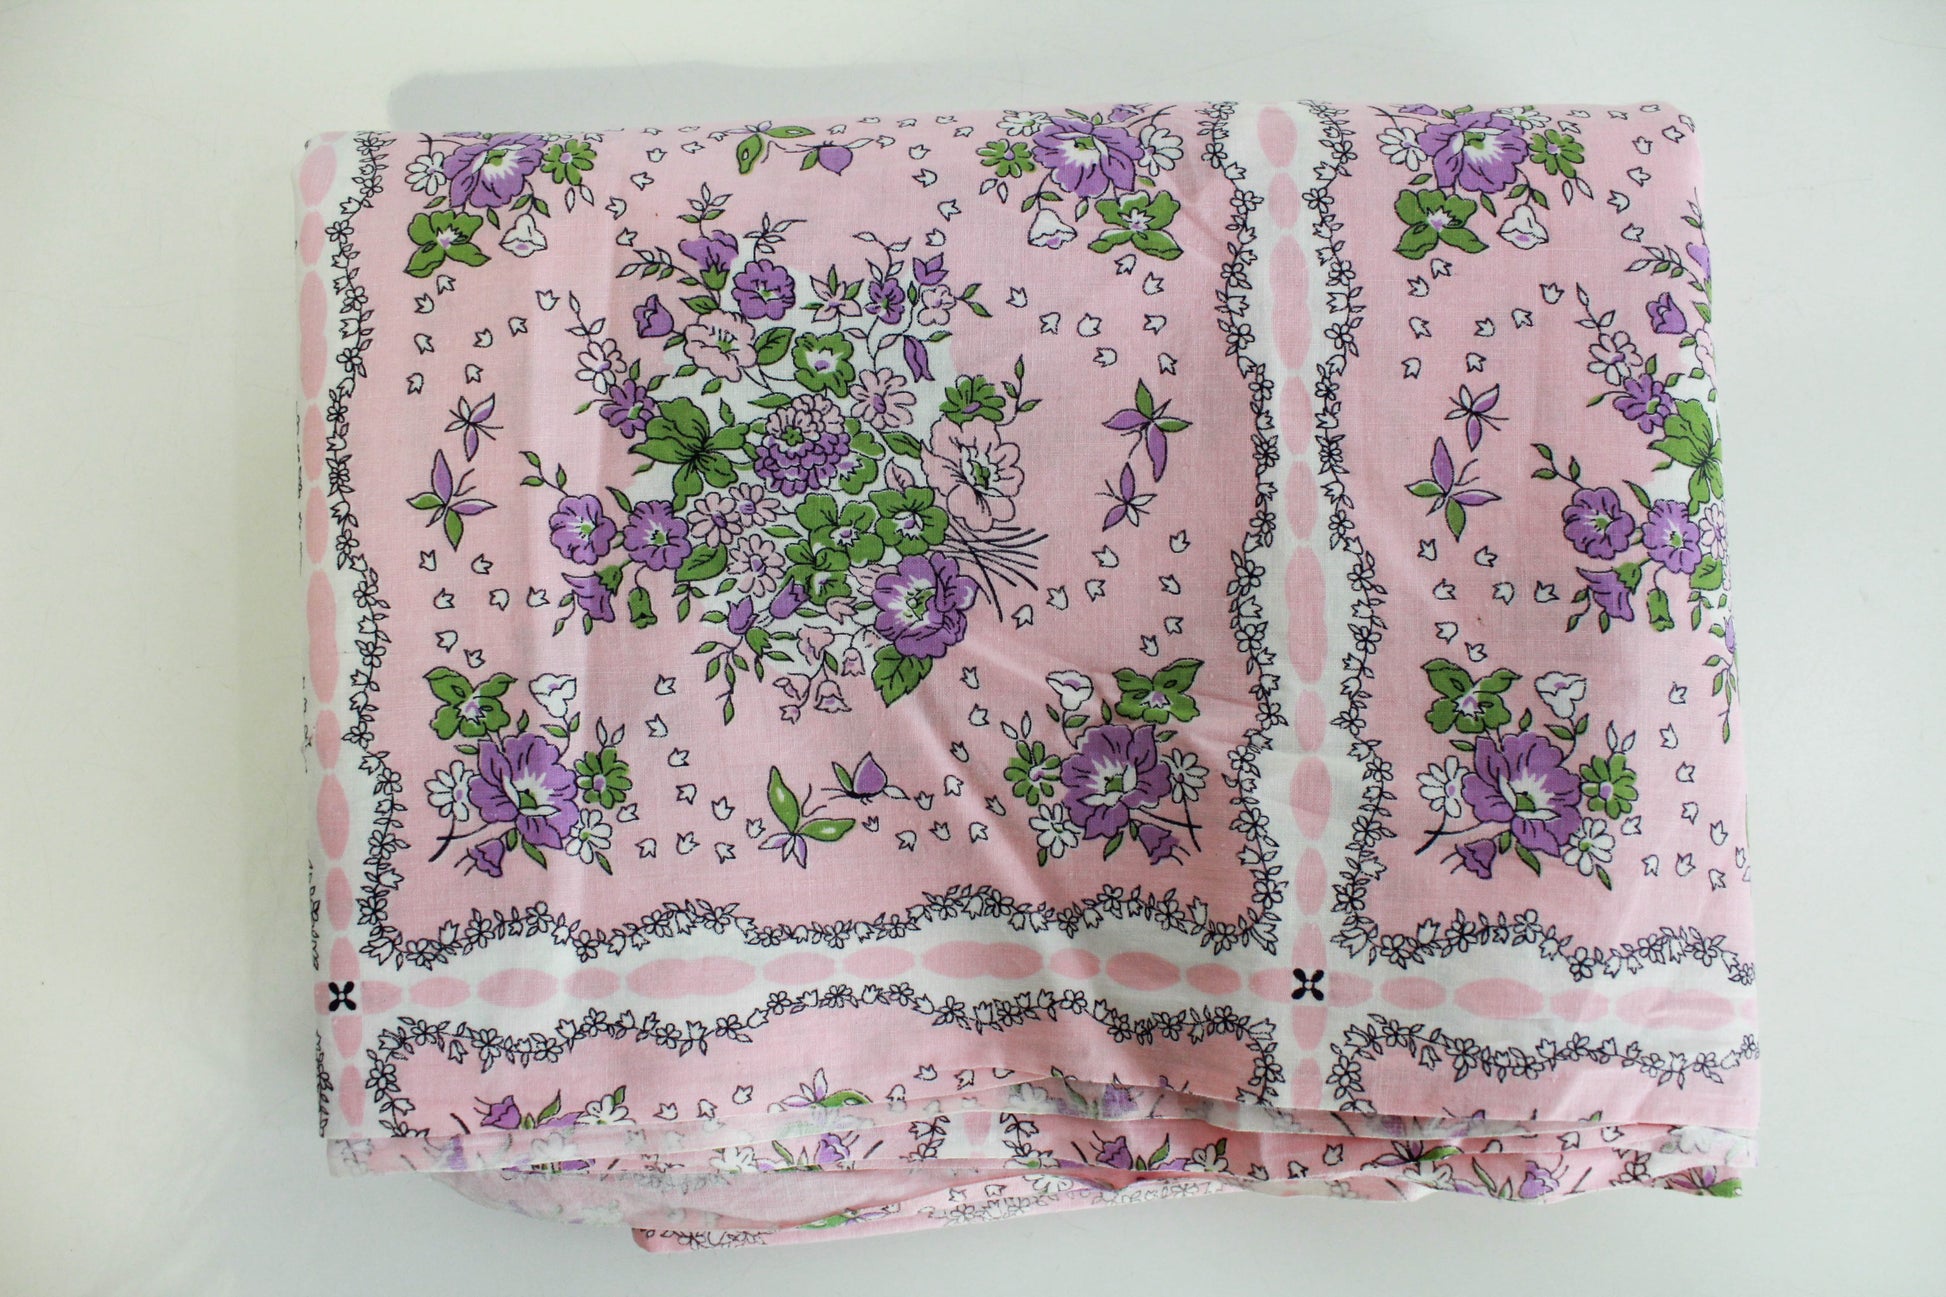 1950s pink floral print cotton sewing fabric square pattern with purple flowers 